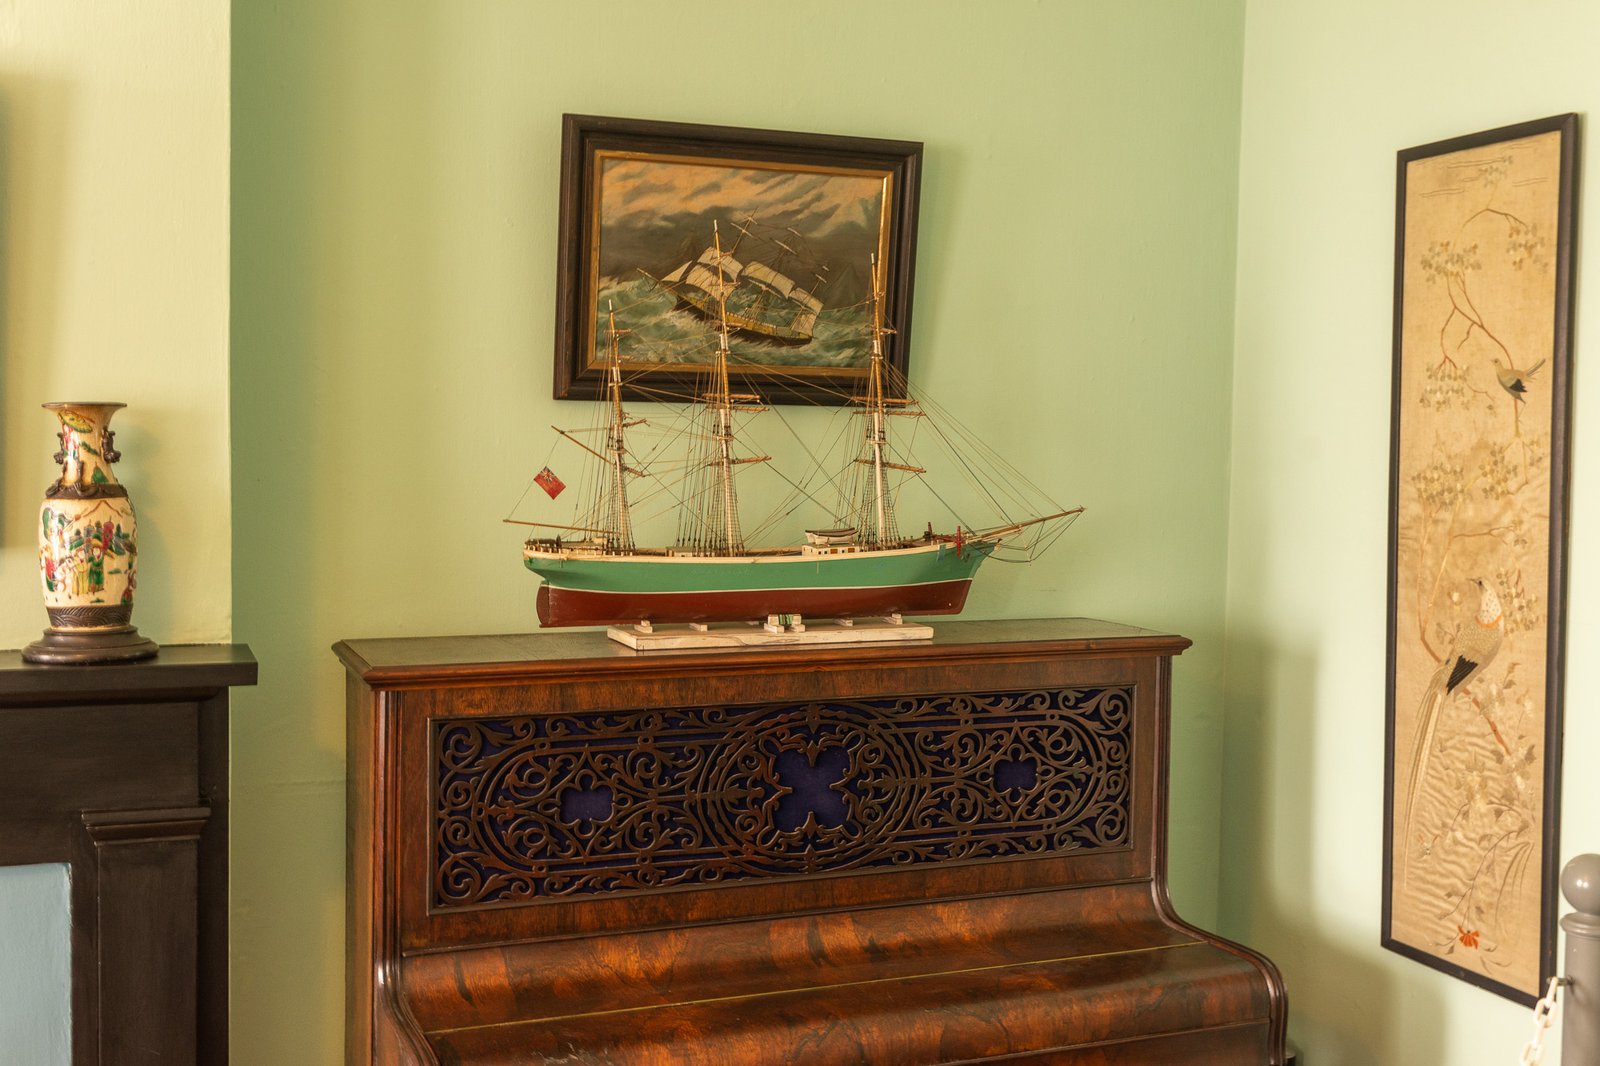 There are so many elegant touches throughout the Point Pino lighthouse.